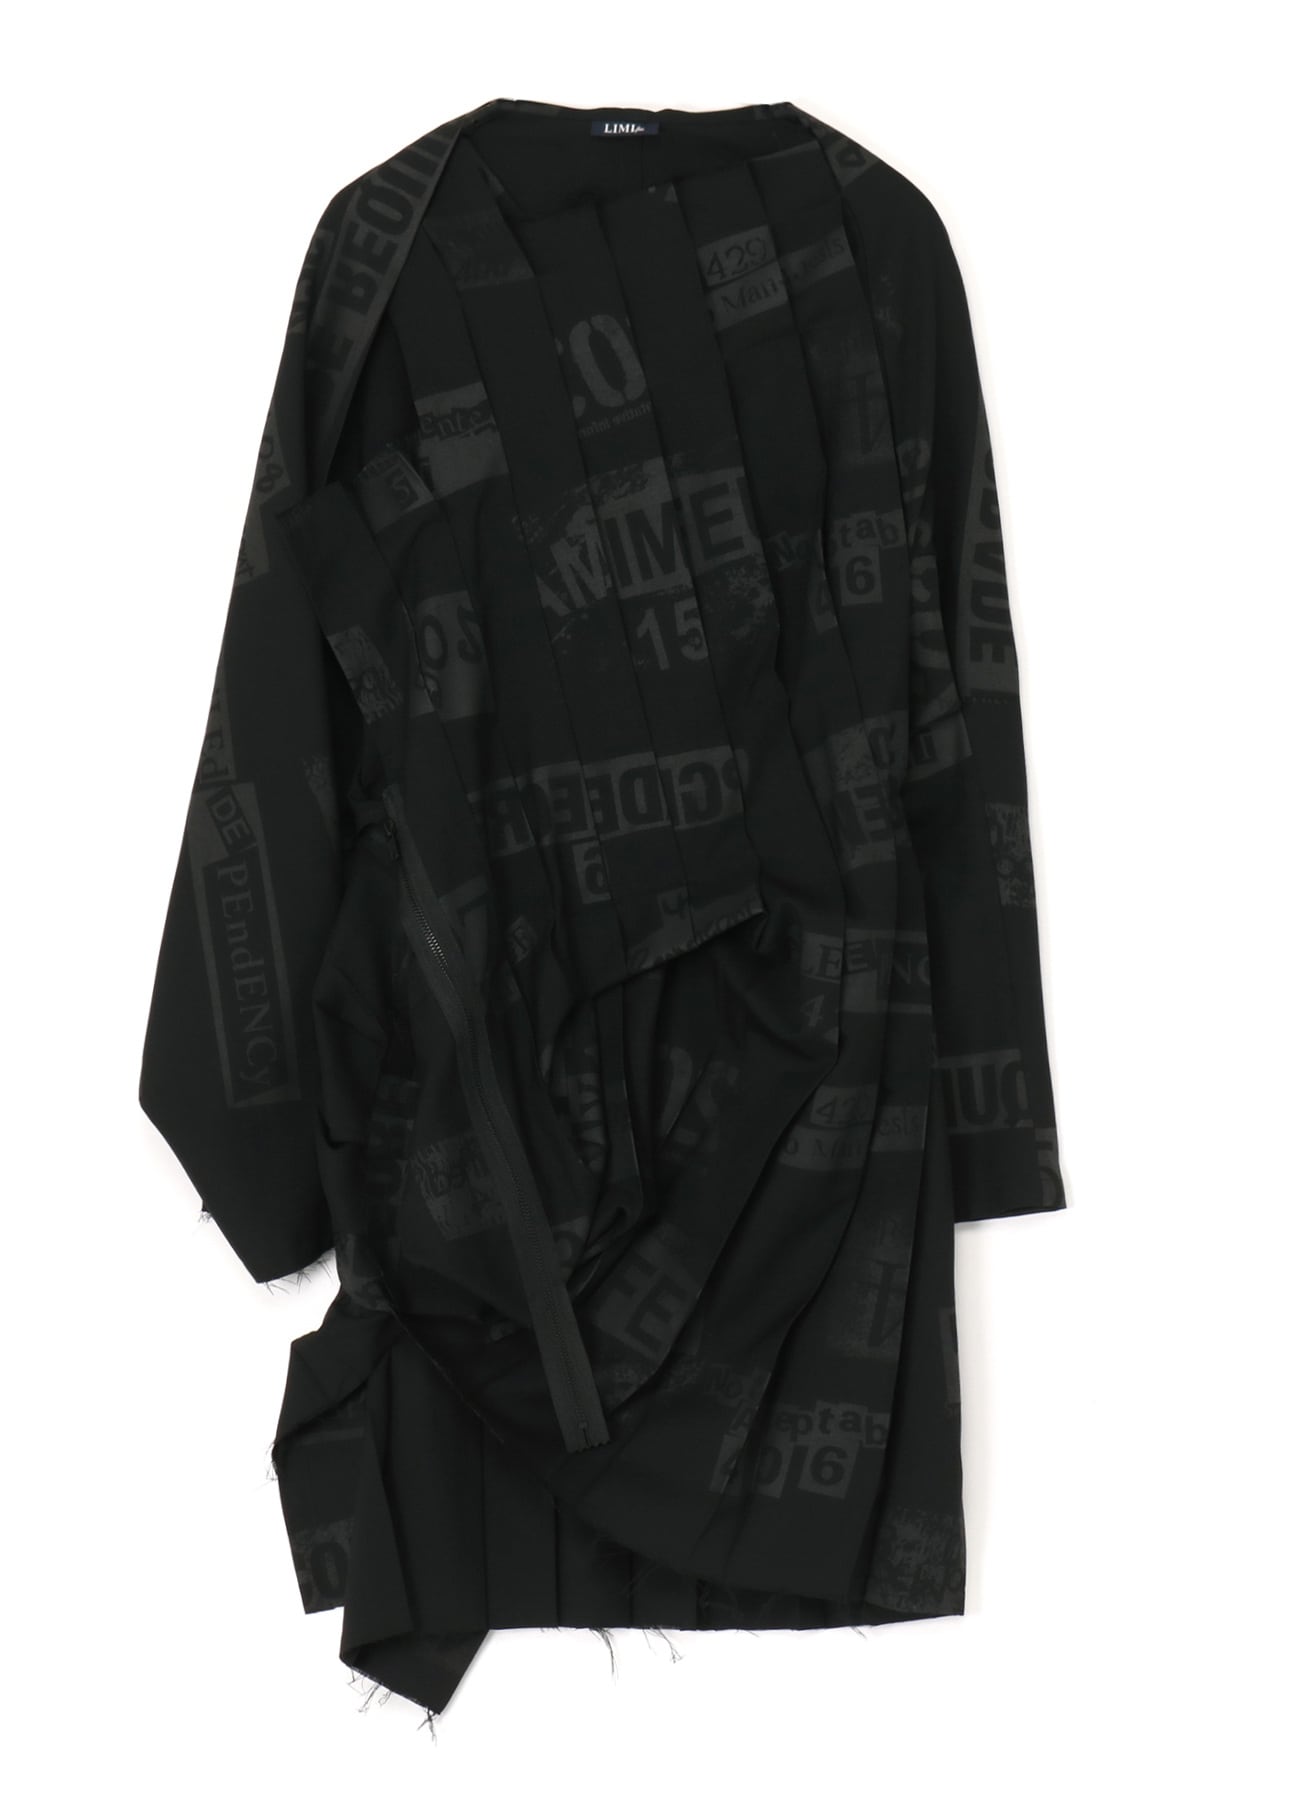 PRINTED SERGE DRESS WITH PLEATED FRONT DETAILS